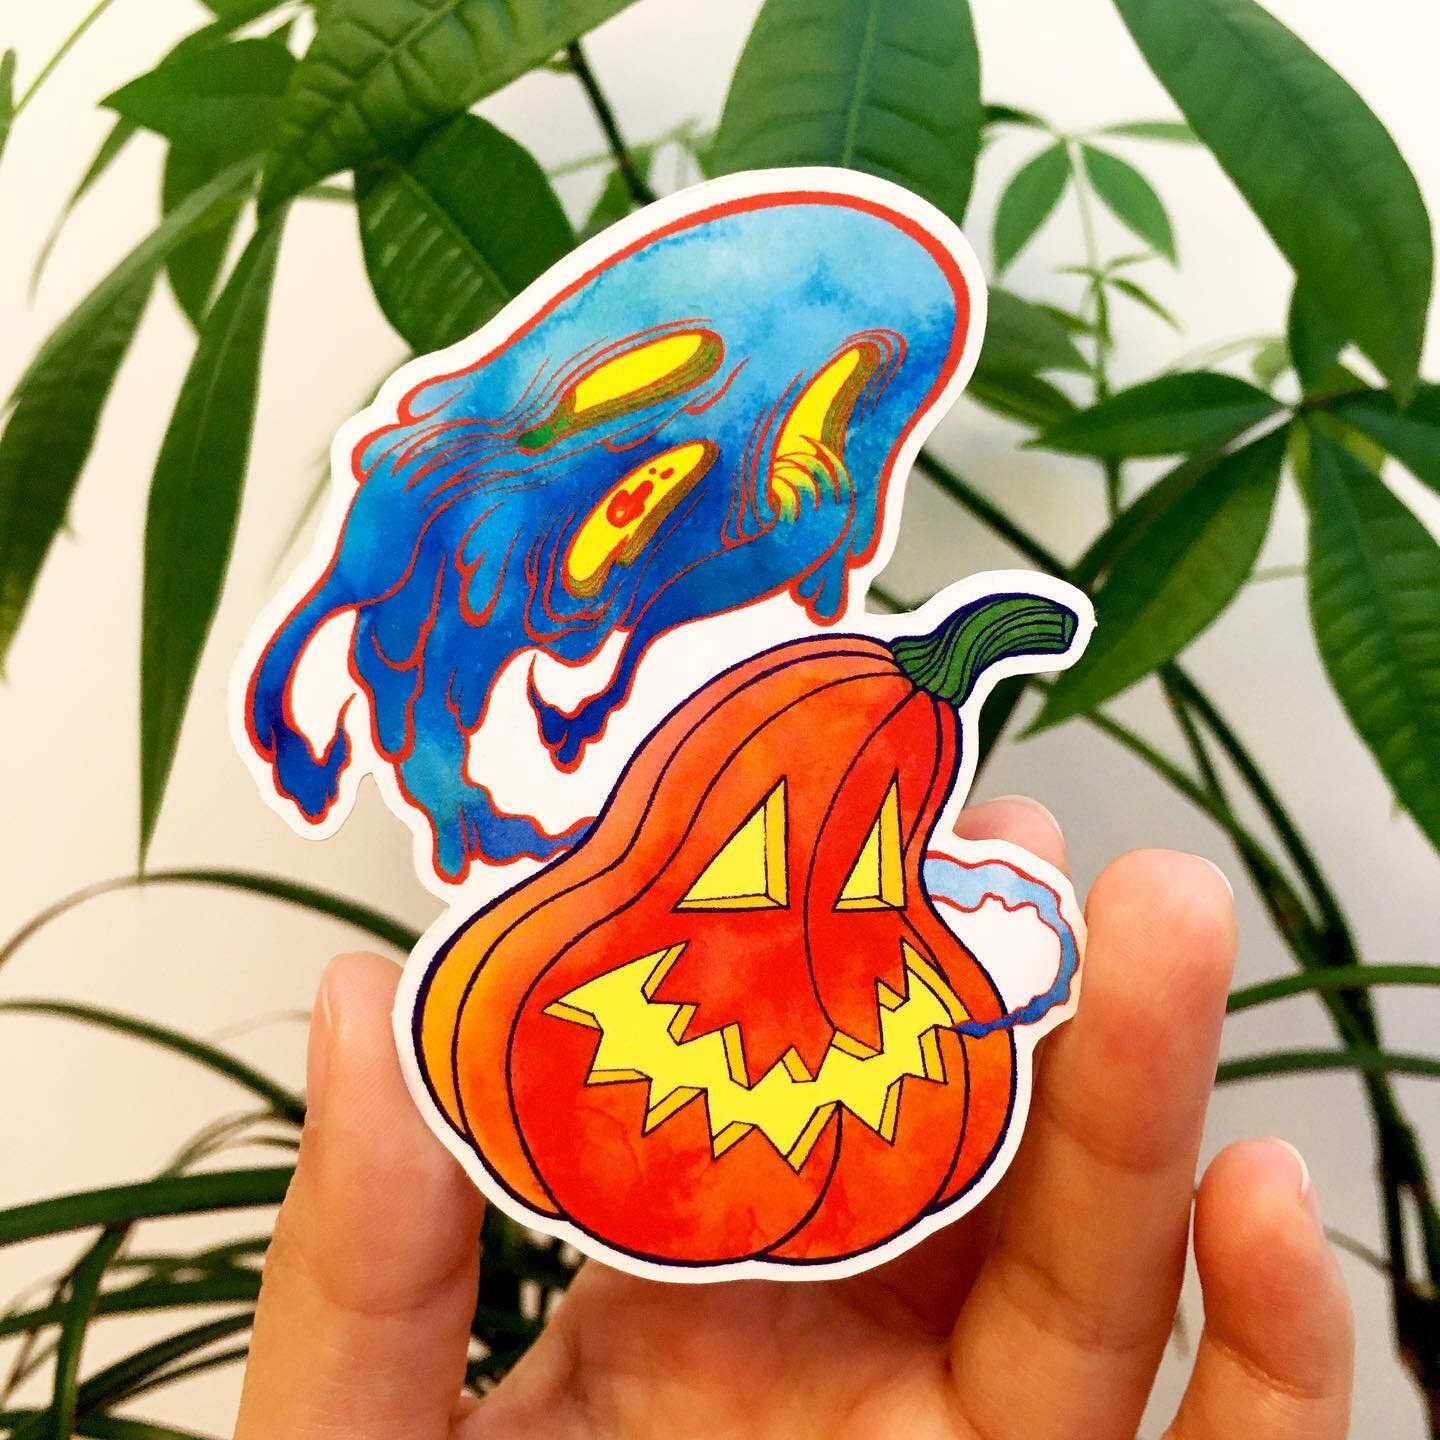 I made a limited run of these Halloween vinyl stickers for the spooky season! I was aiming for a bit of spooky and a bit of cute. Does it work? Either way, poor pumpkin becomes a ghost🎃 👻 
.
.
.
.
.
.
.
#halloweenstickers #vinylstickers #stickerapp